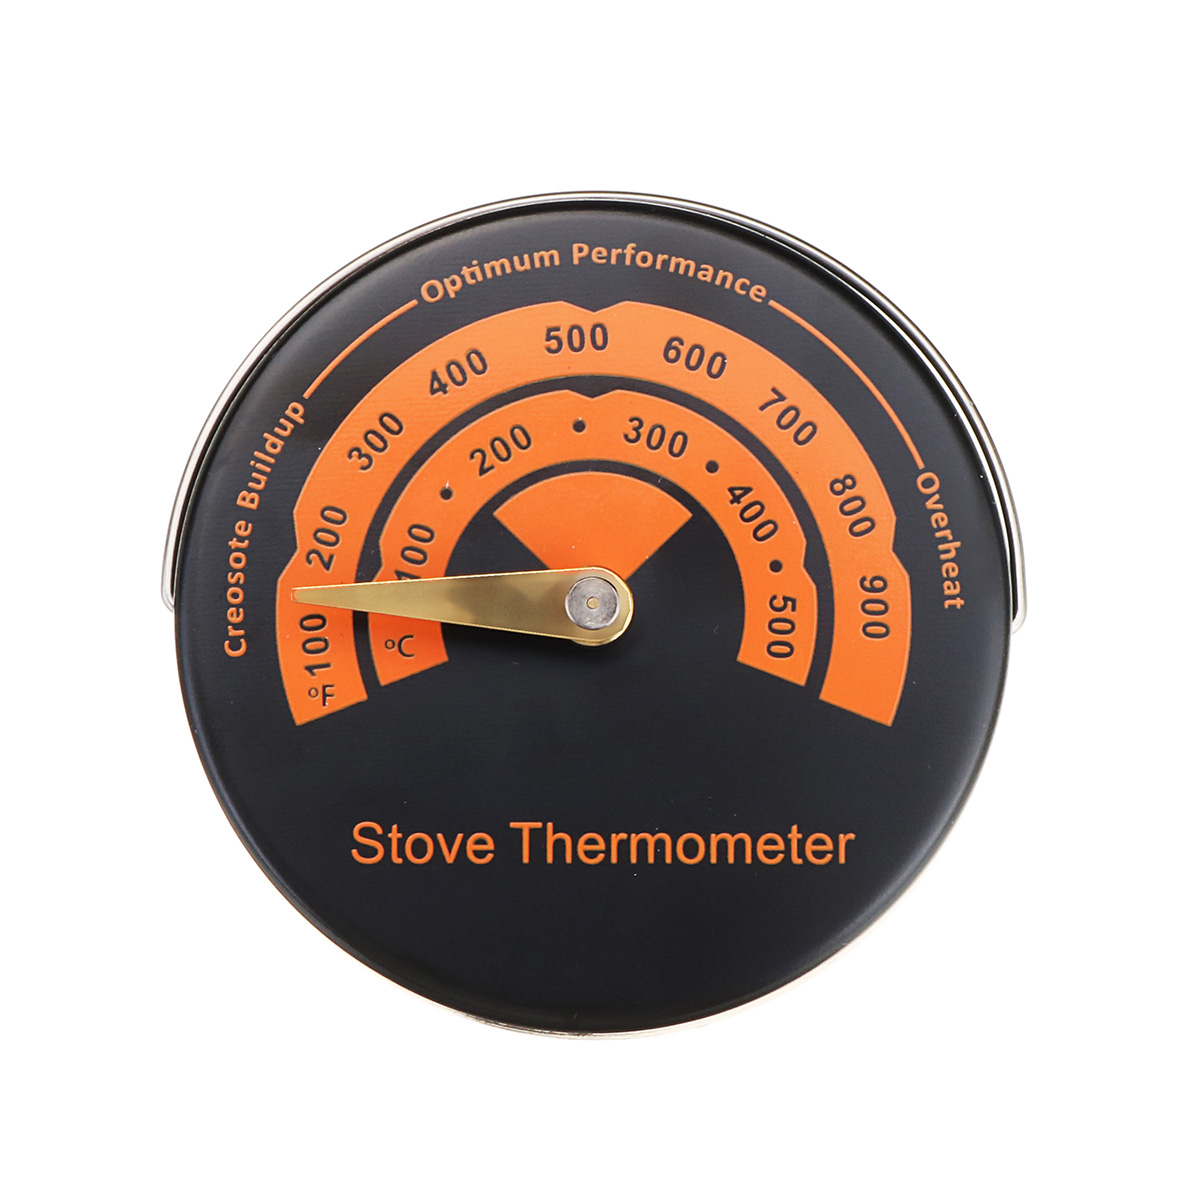 Find 1PC Alloy Magnetic Stove Flue Pipe Thermometer Dropshipping Magnetic Wood Stove Thermometer Fireplace Fan Stove Thermometer BBQ Thermometer for Sale on Gipsybee.com with cryptocurrencies